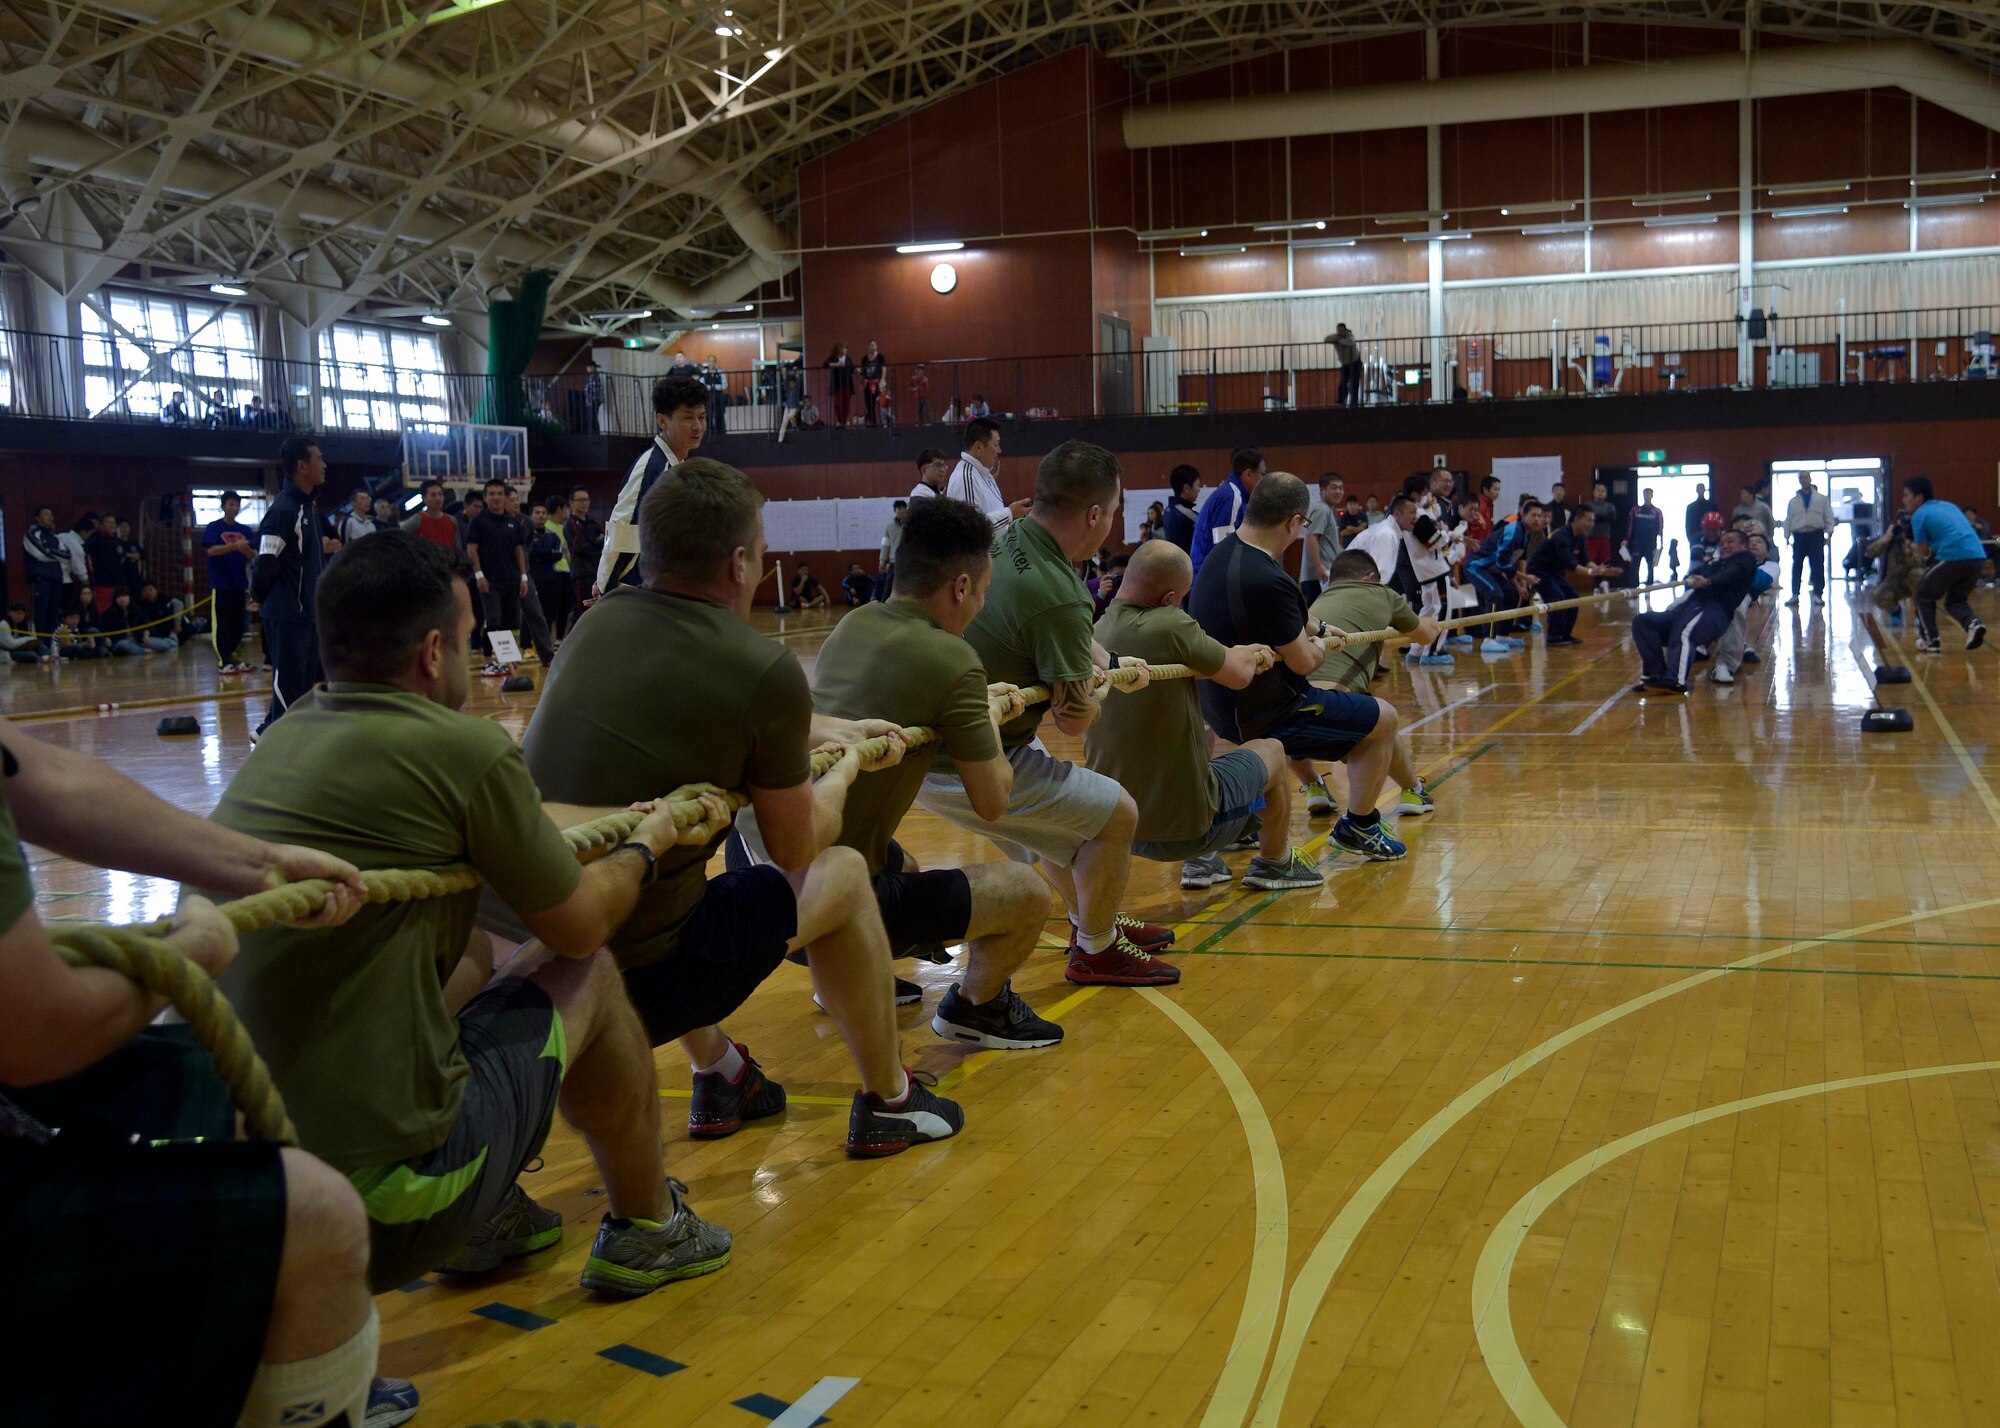 Military members from the Royal Air Force and Japan Air Self-Defense Force compete in the 15th Annual Northern Air Defense Force tug of war event, at Misawa Air Base, Japan, Oct. 22, 2016. The Royal Air Force had an opportunity to join this annual event due to their presence here for Guardian North 16, the first-ever bilateral exercise, with JASDF members. In addition to this event, JASDF also held a friendship party to help participants bond in a non-work environment. (U.S. Air Force photo by Senior Airman Deana Heitzman)